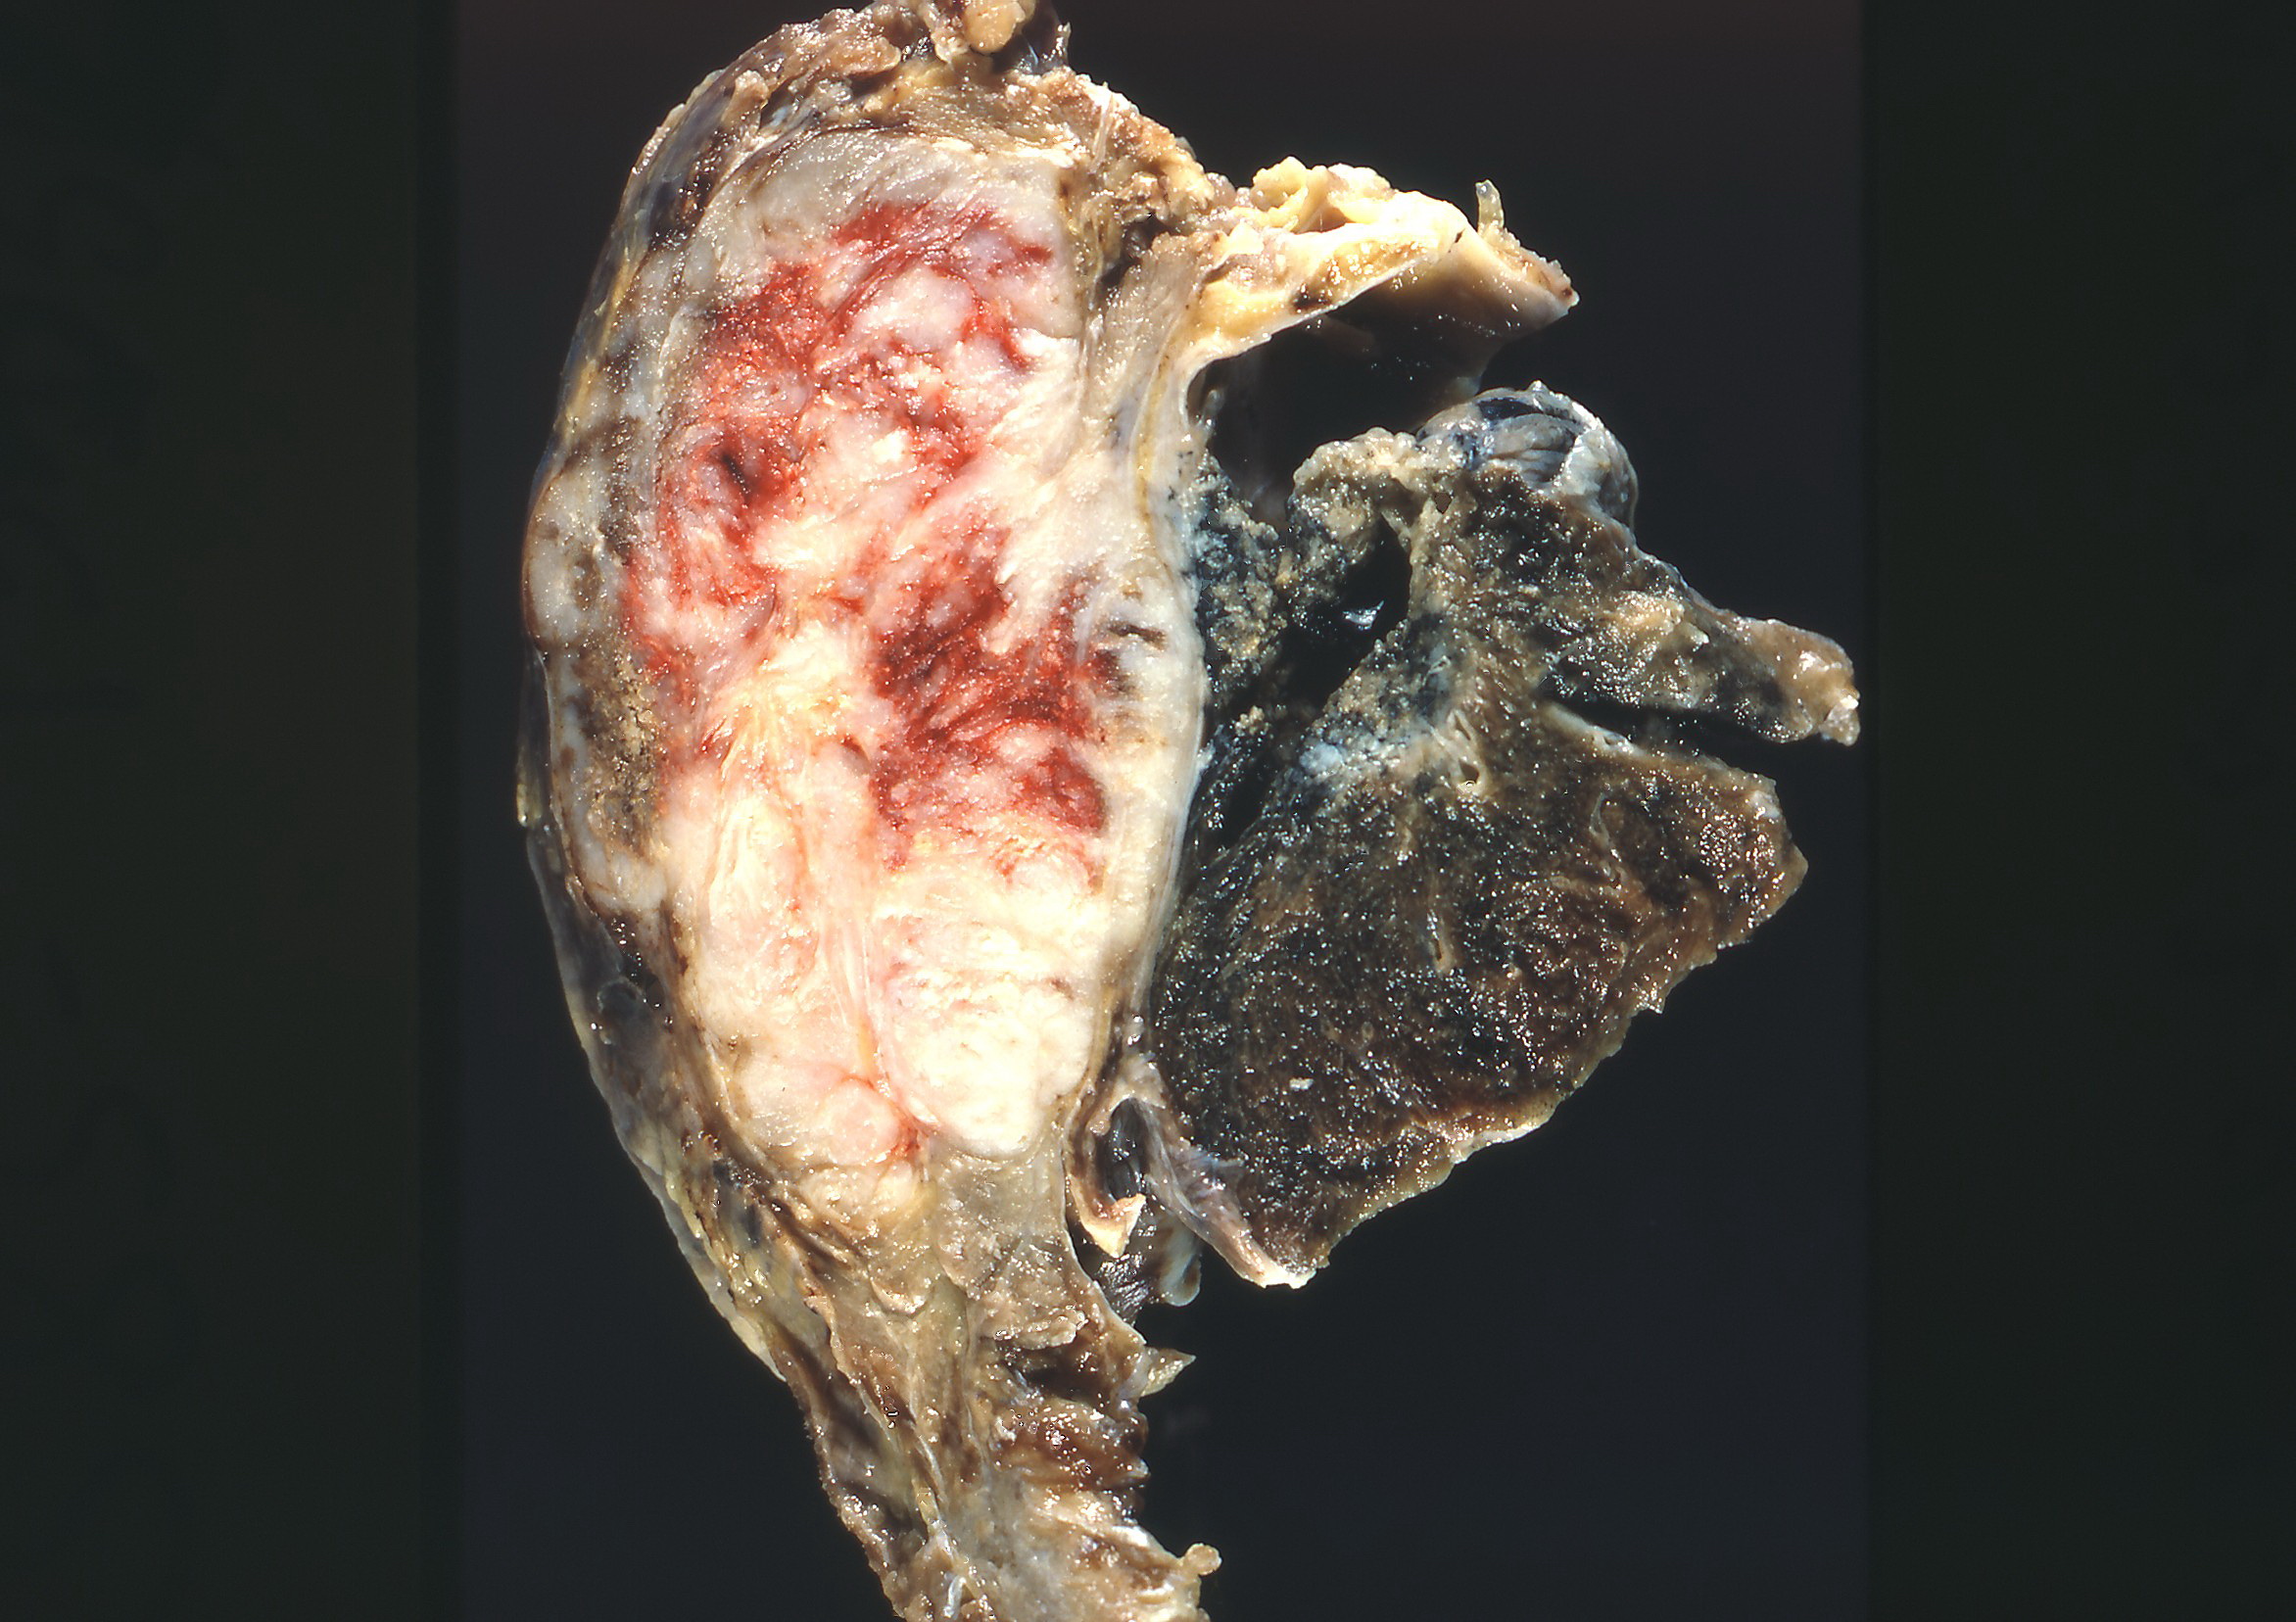 Gross pathology: adenocarcinoma of the lung